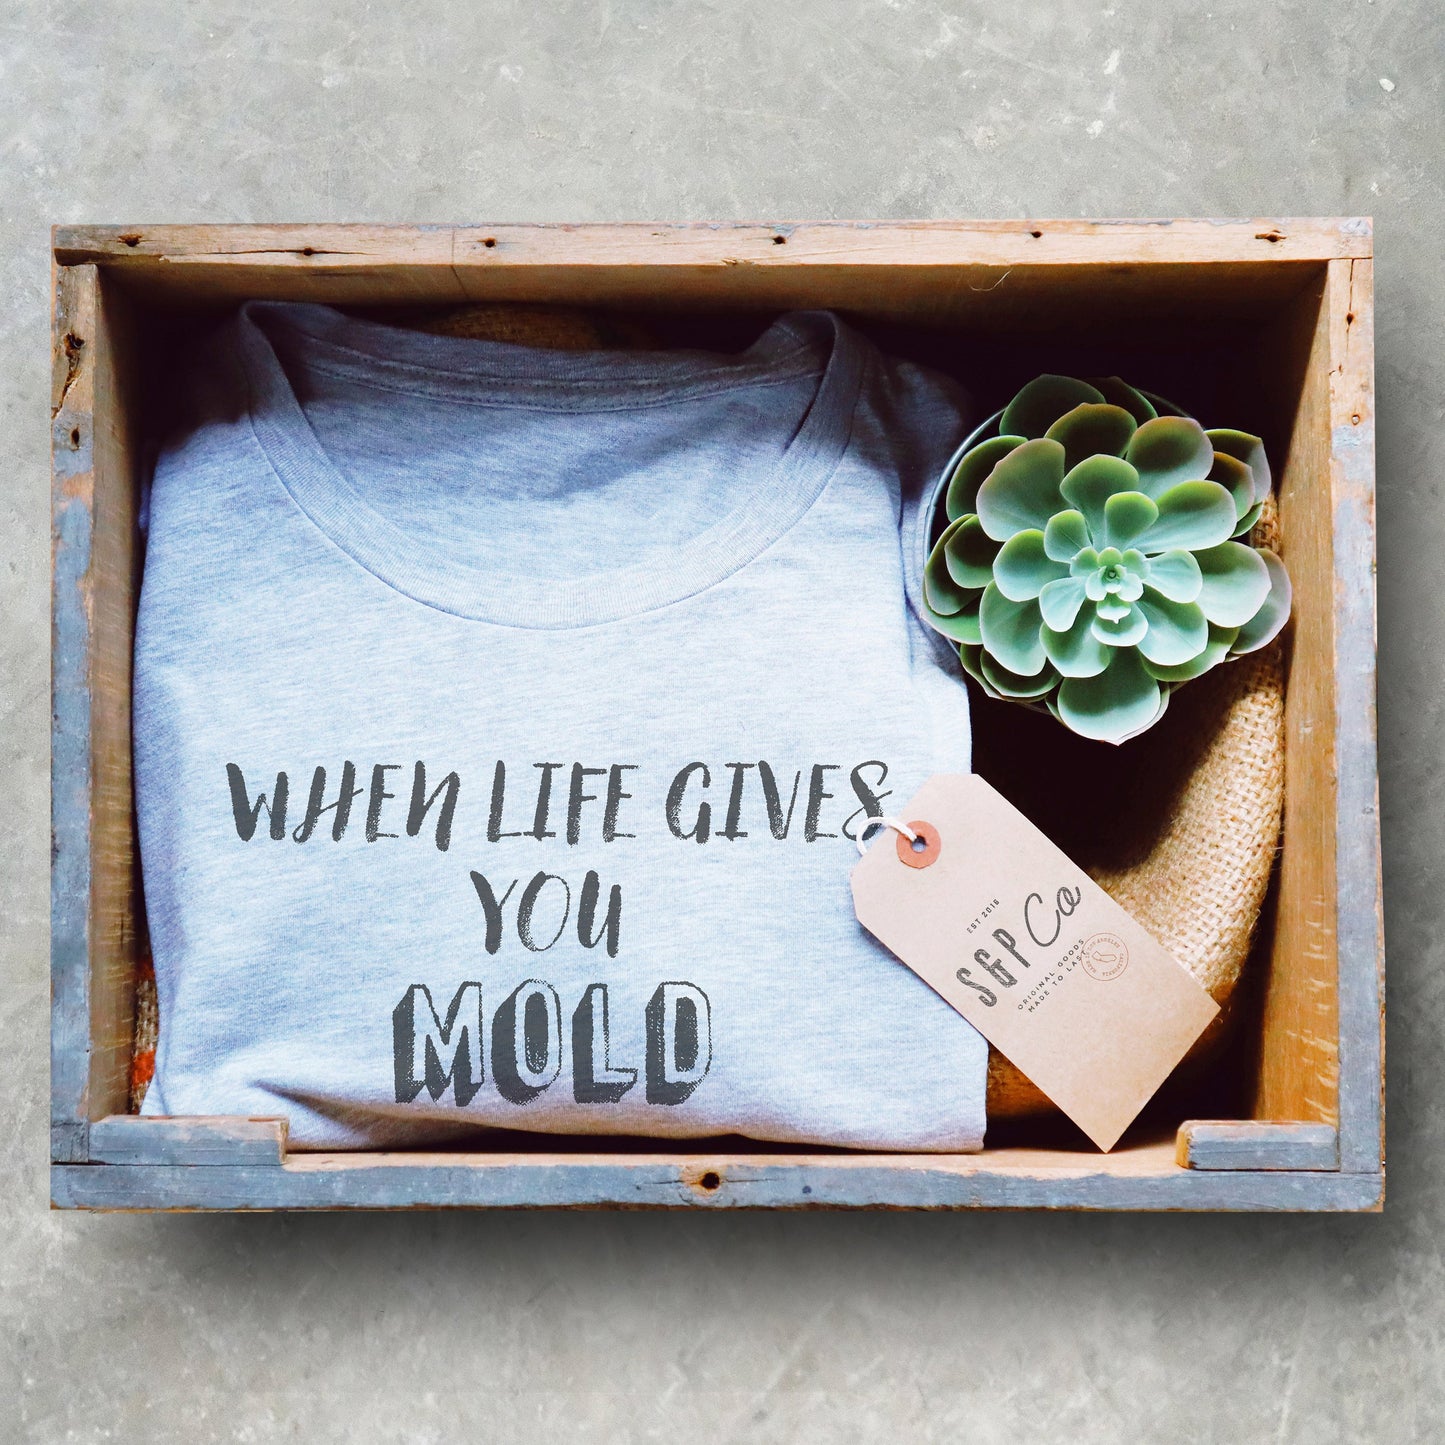 When Life Gives You Mold Make Penicillin Unisex Shirt - Microbiologist Shirt, Microbiology Gift, Medical School Gift, Chemist Shirt, Science